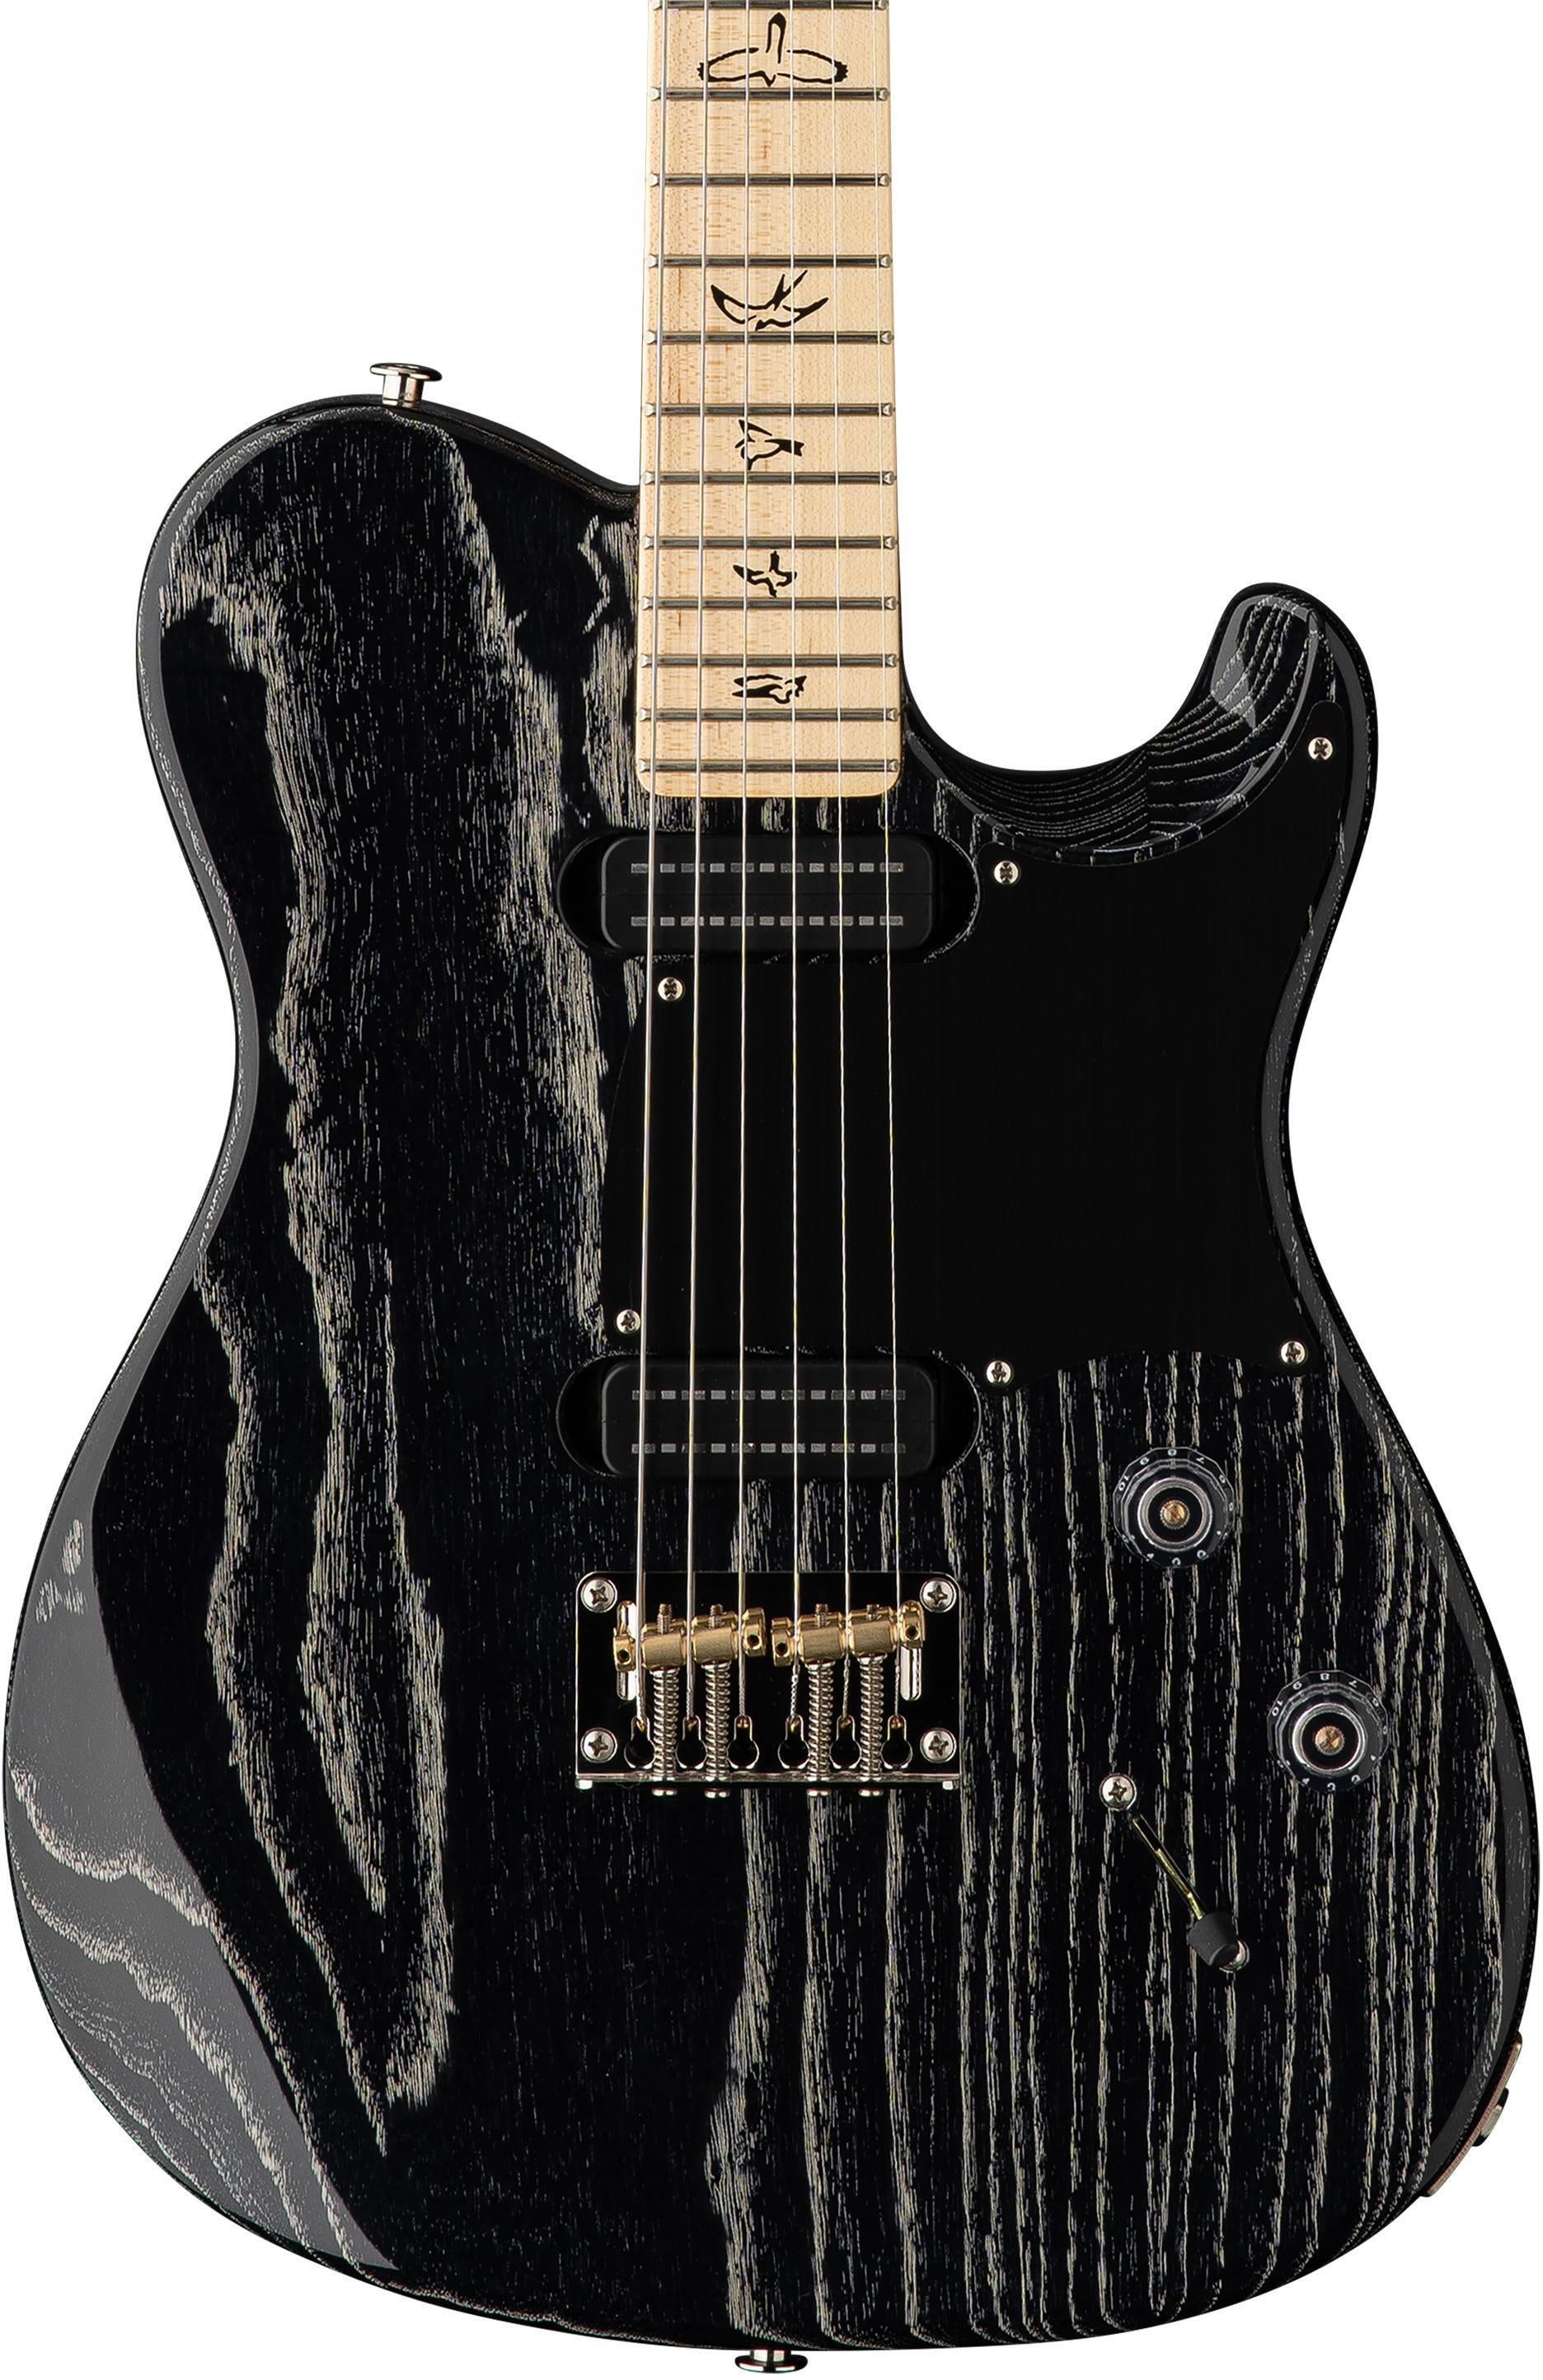 PRS NF 53 Electric Guitar - Black Doghair | Sweetwater